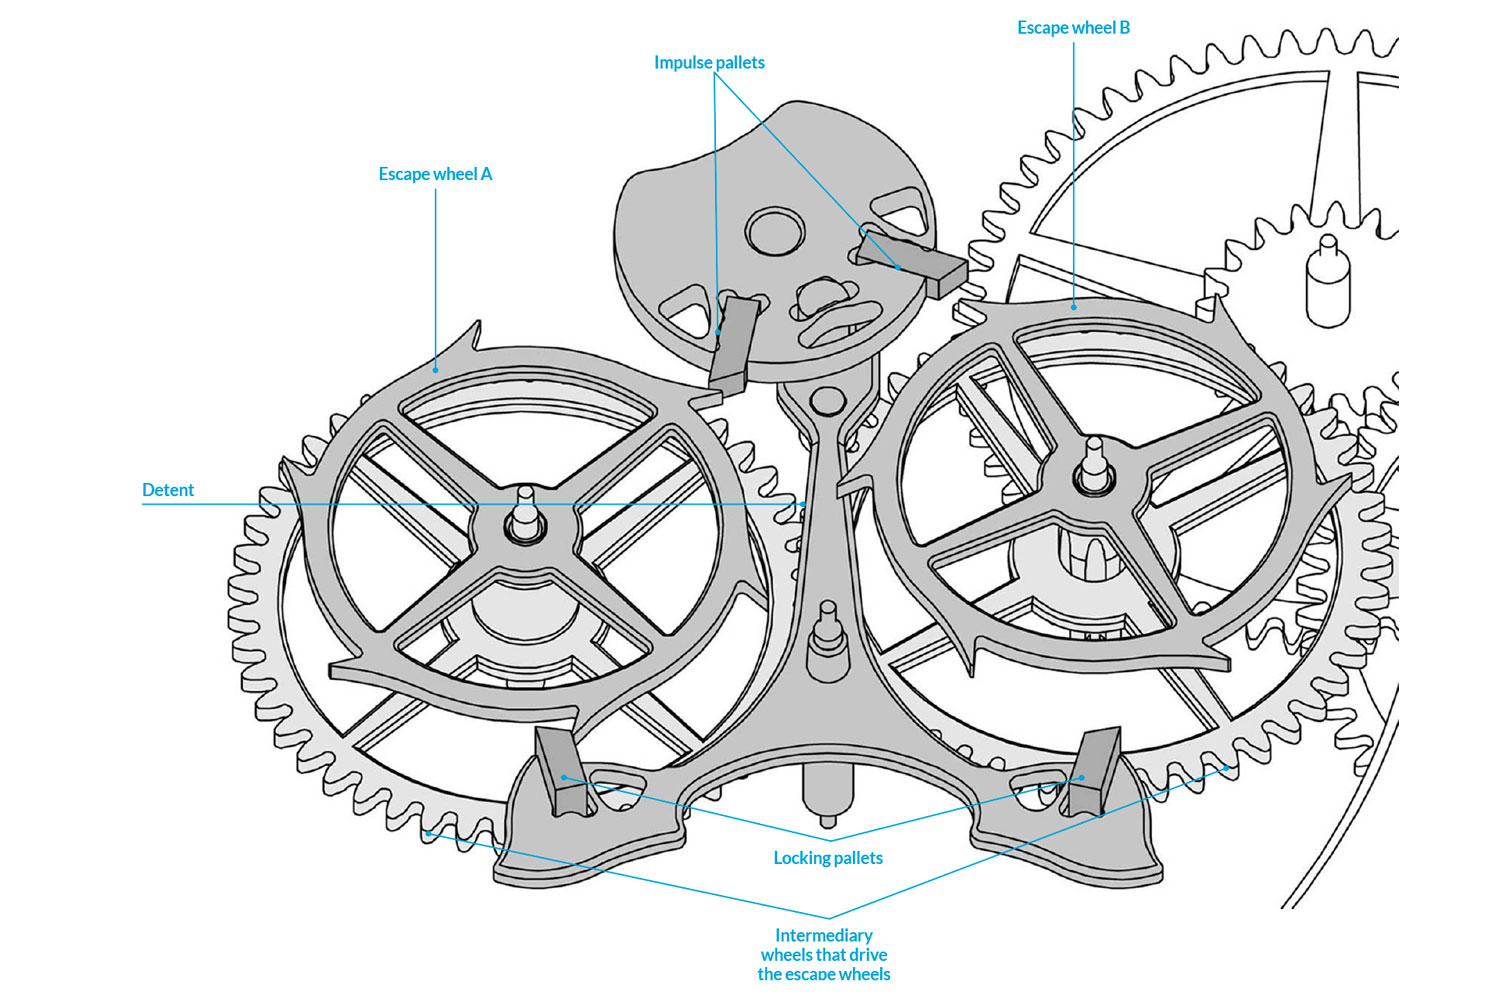 Illustrating the bi-axial high-performance escapement in Journe's Chronomètre Optimum, in which the two escape wheels are driven by a second pair of wheels at the bottom